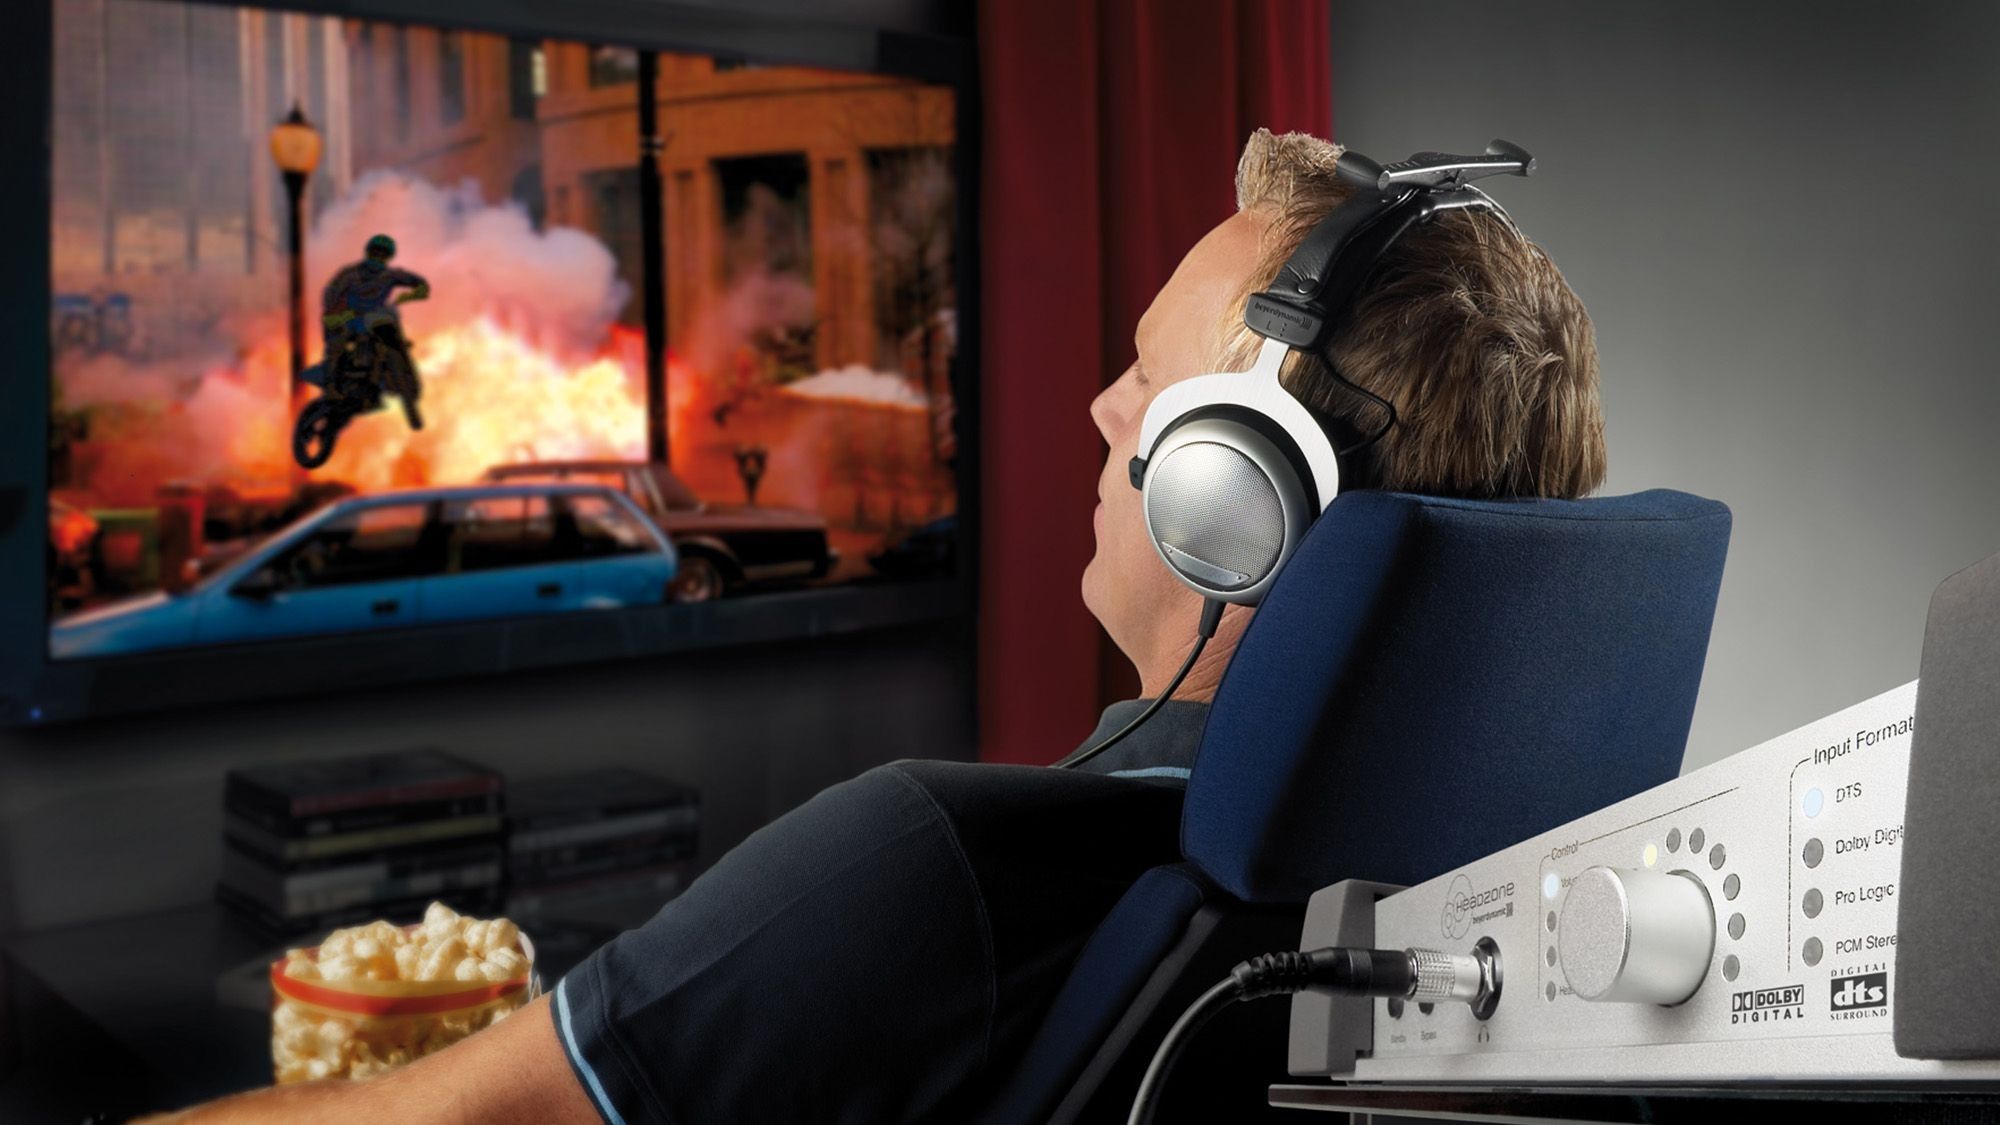 Man sitting in front of the TV with headphones